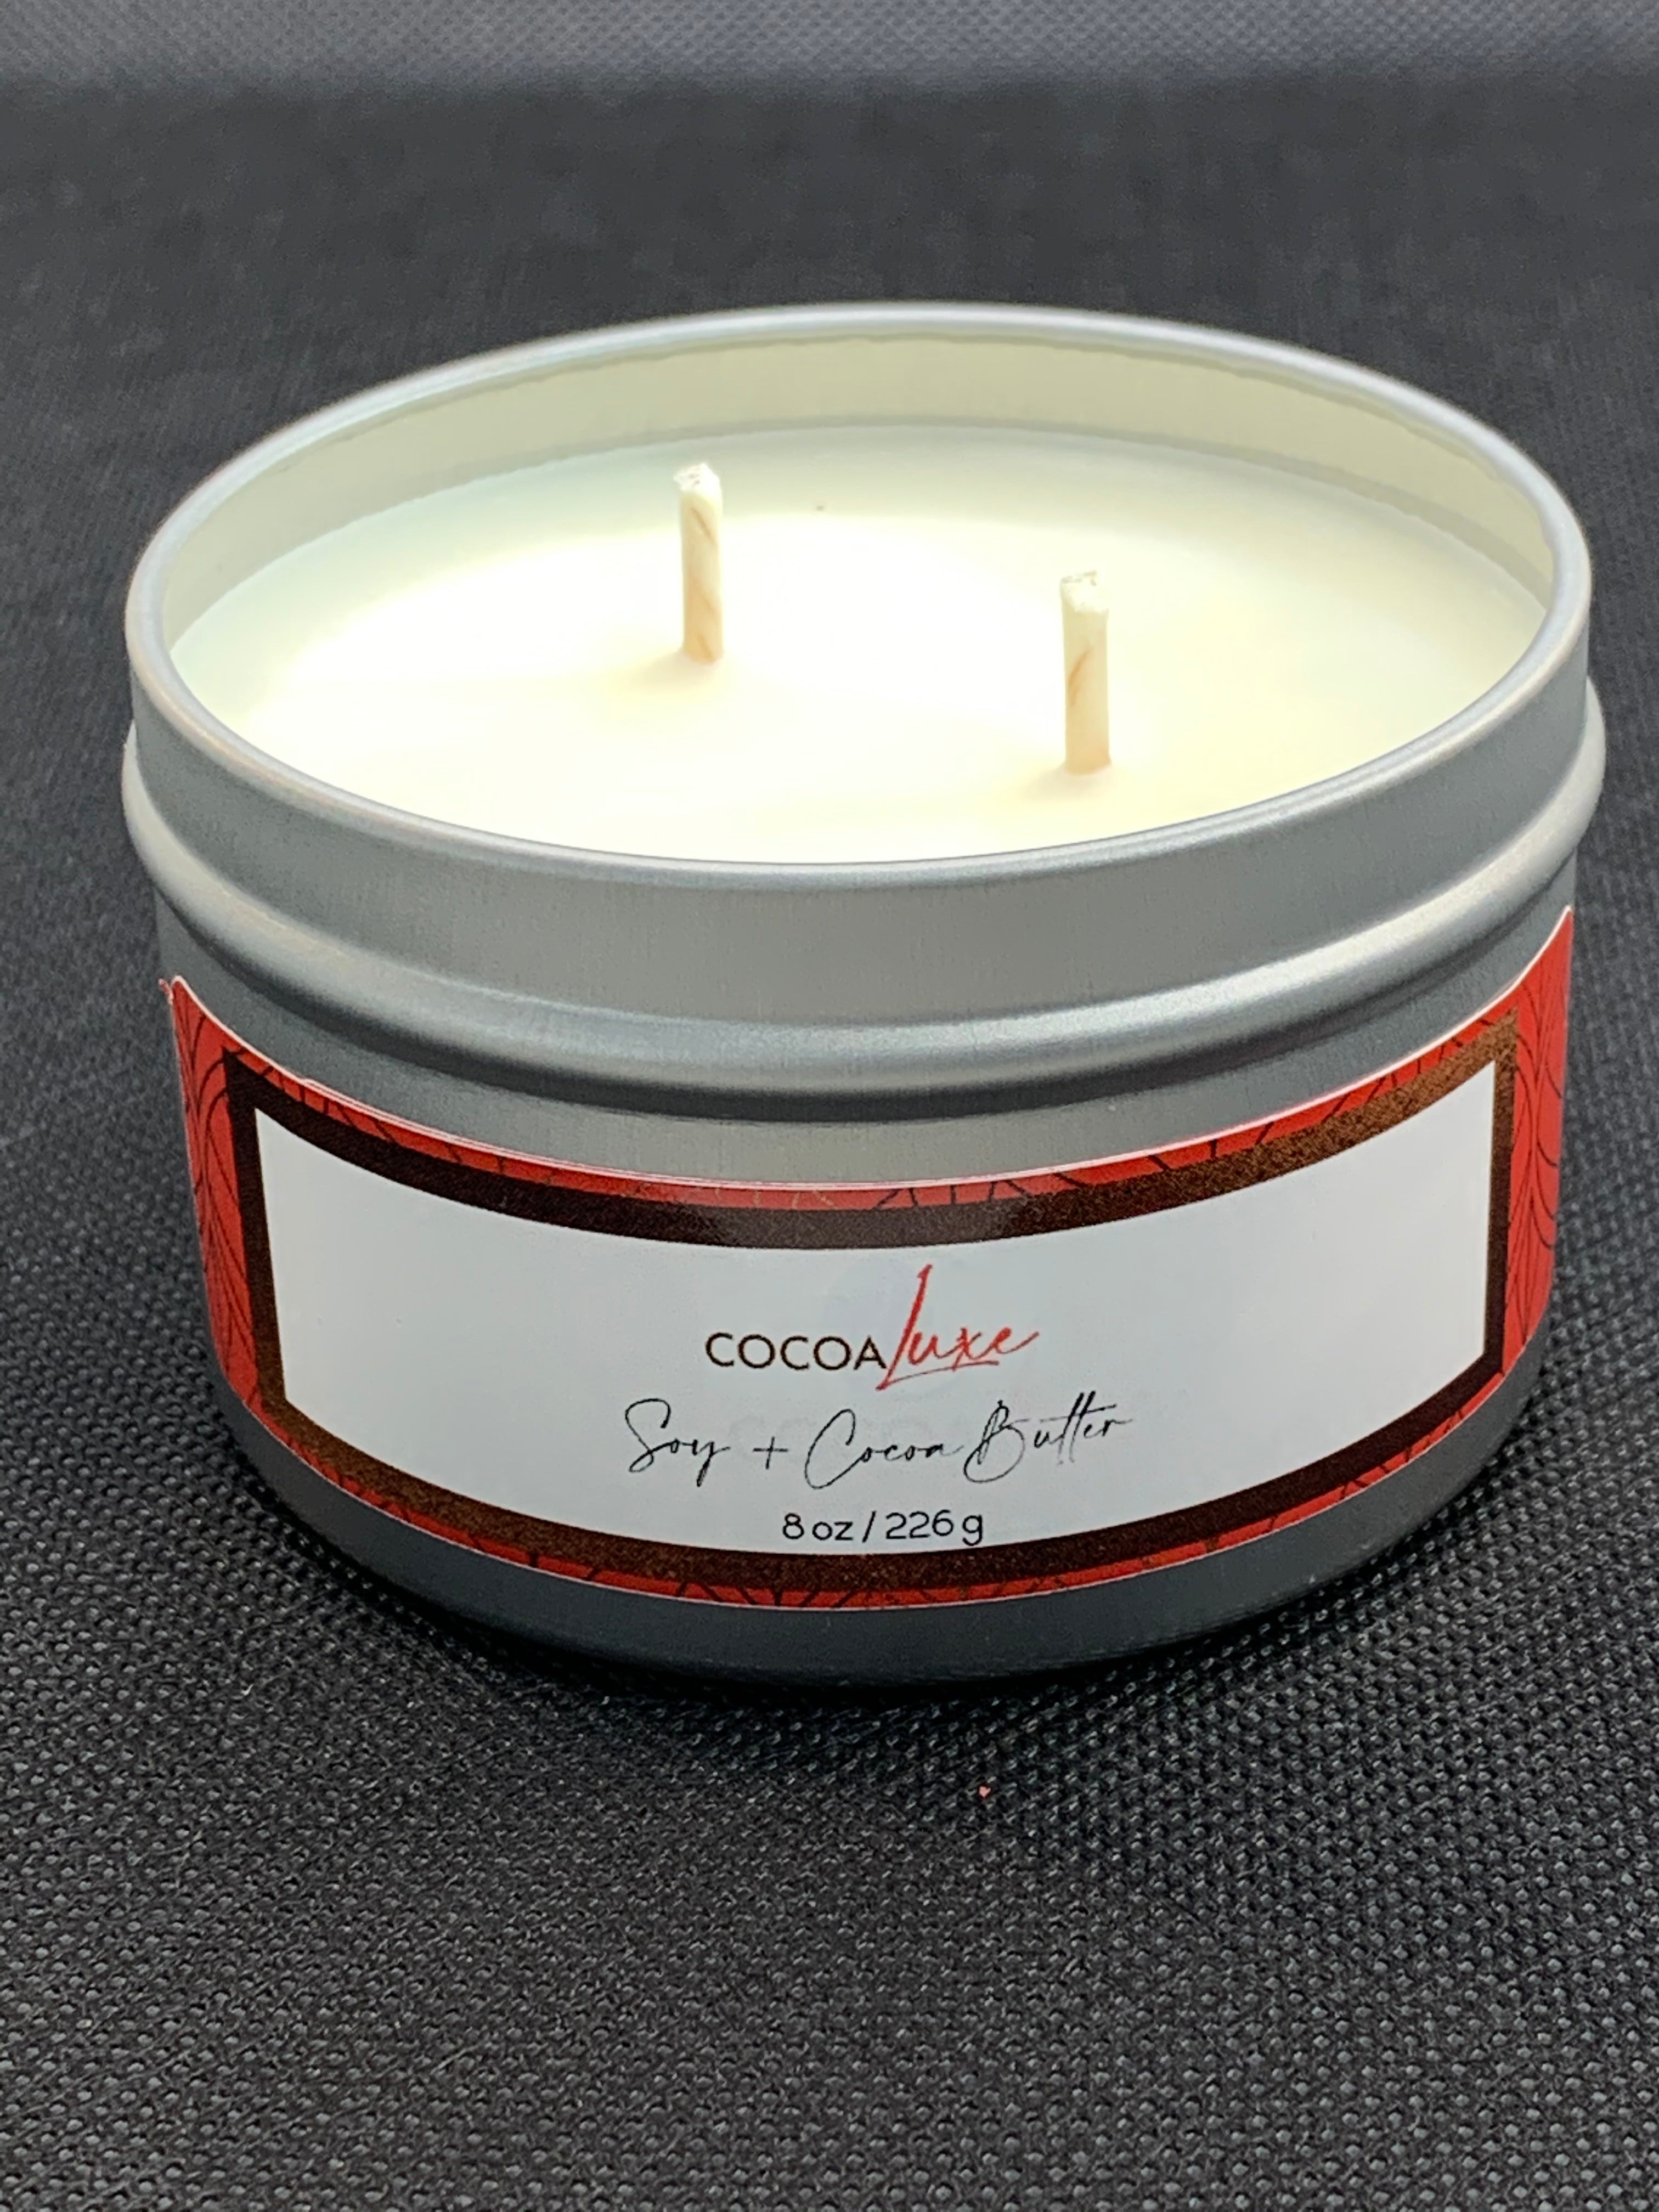 Soy + Cocoa Butter Candle - 6oz.